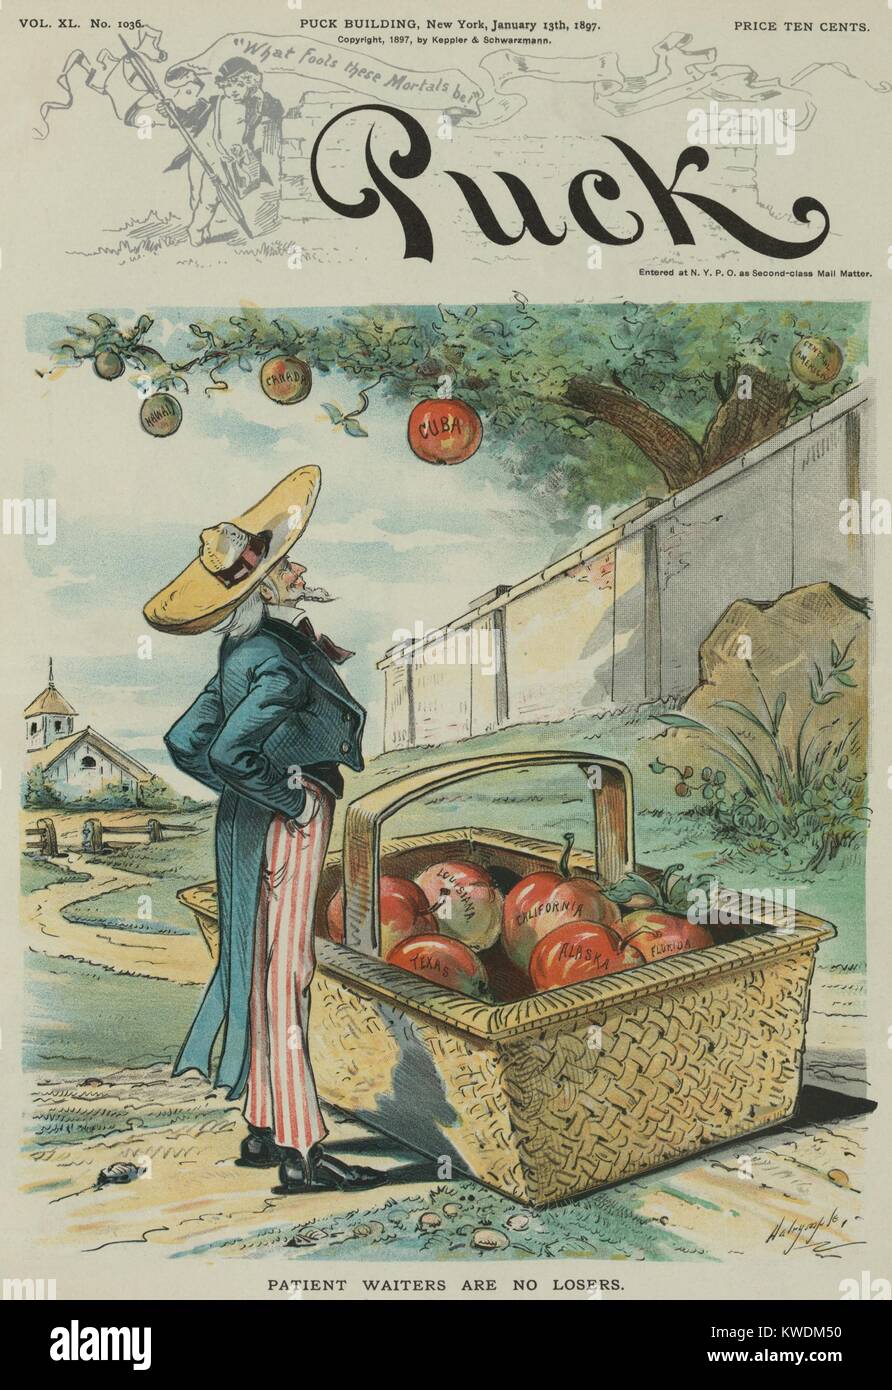 PATIENT WAITER ARE NO LOSERS, political cartoon from Puck Magazine, Jan. 13, 1897. Uncle Sam waits beneath an apple tree wearing a sombrero, where apples are labeled Hawaii, Canada, Cuba, and Central America. Sam already has apples labeled Louisiana, Texas, California, Alaska, and Florida in his gathering basket (BSLOC 2017 10 8) Stock Photo